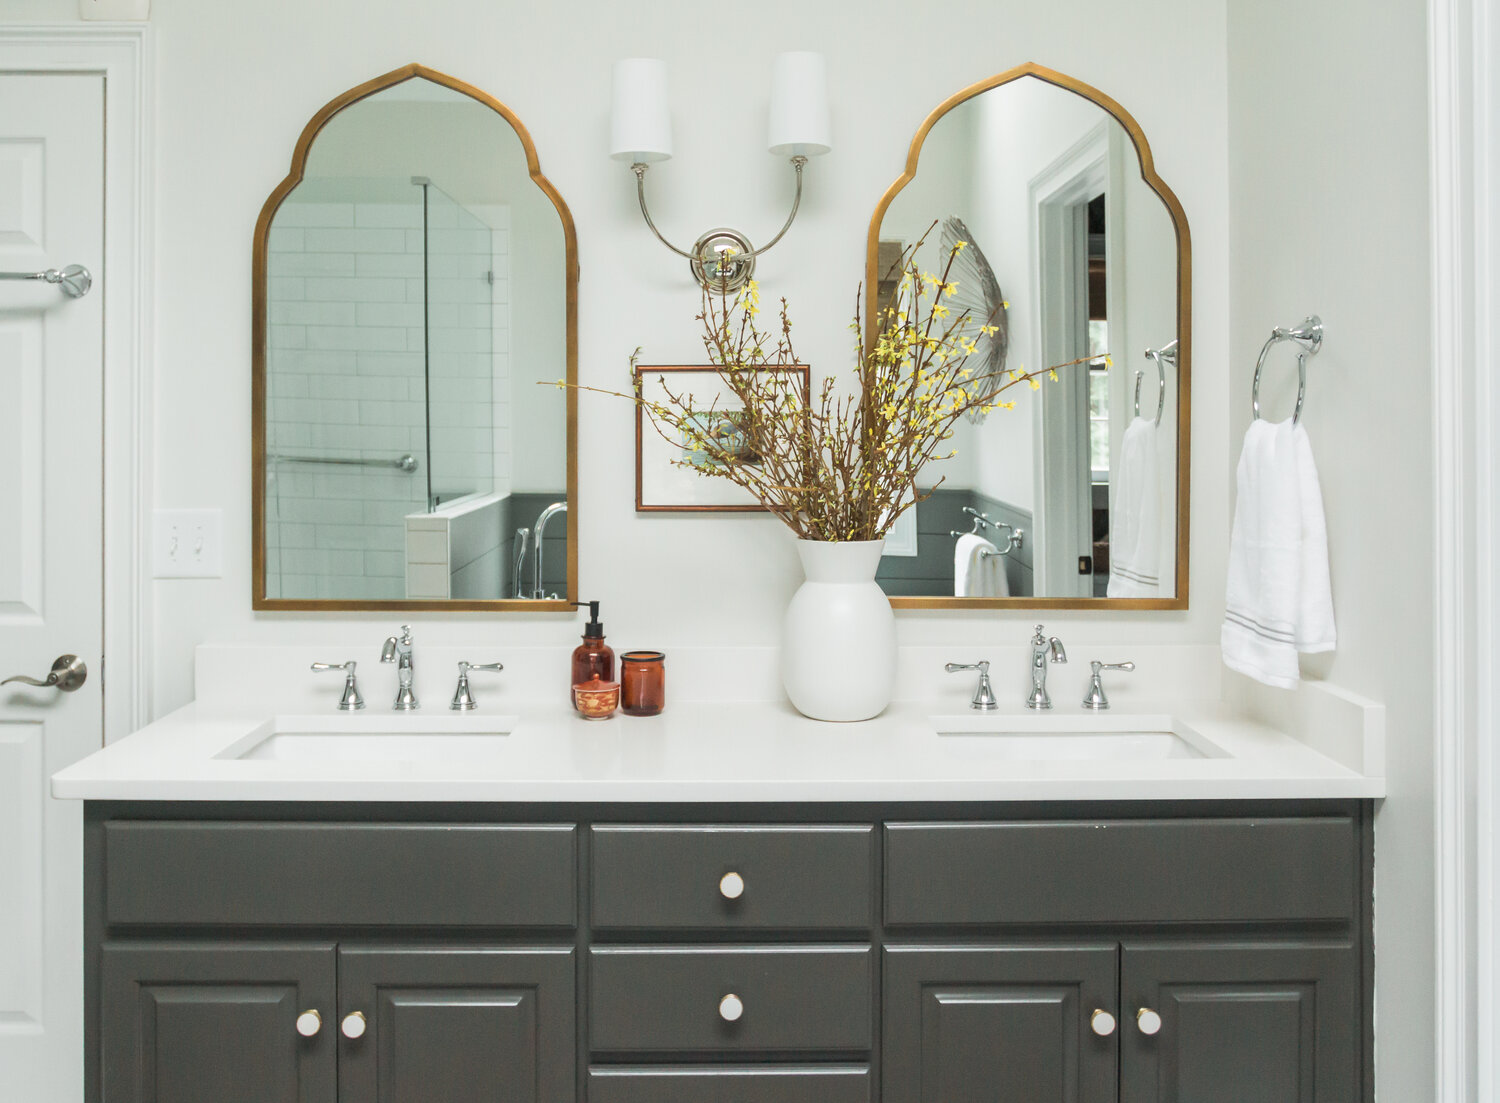 Bathroom vanity with white countertop, dark gray drawers, vintage mirrors, and lampshade lighting. 